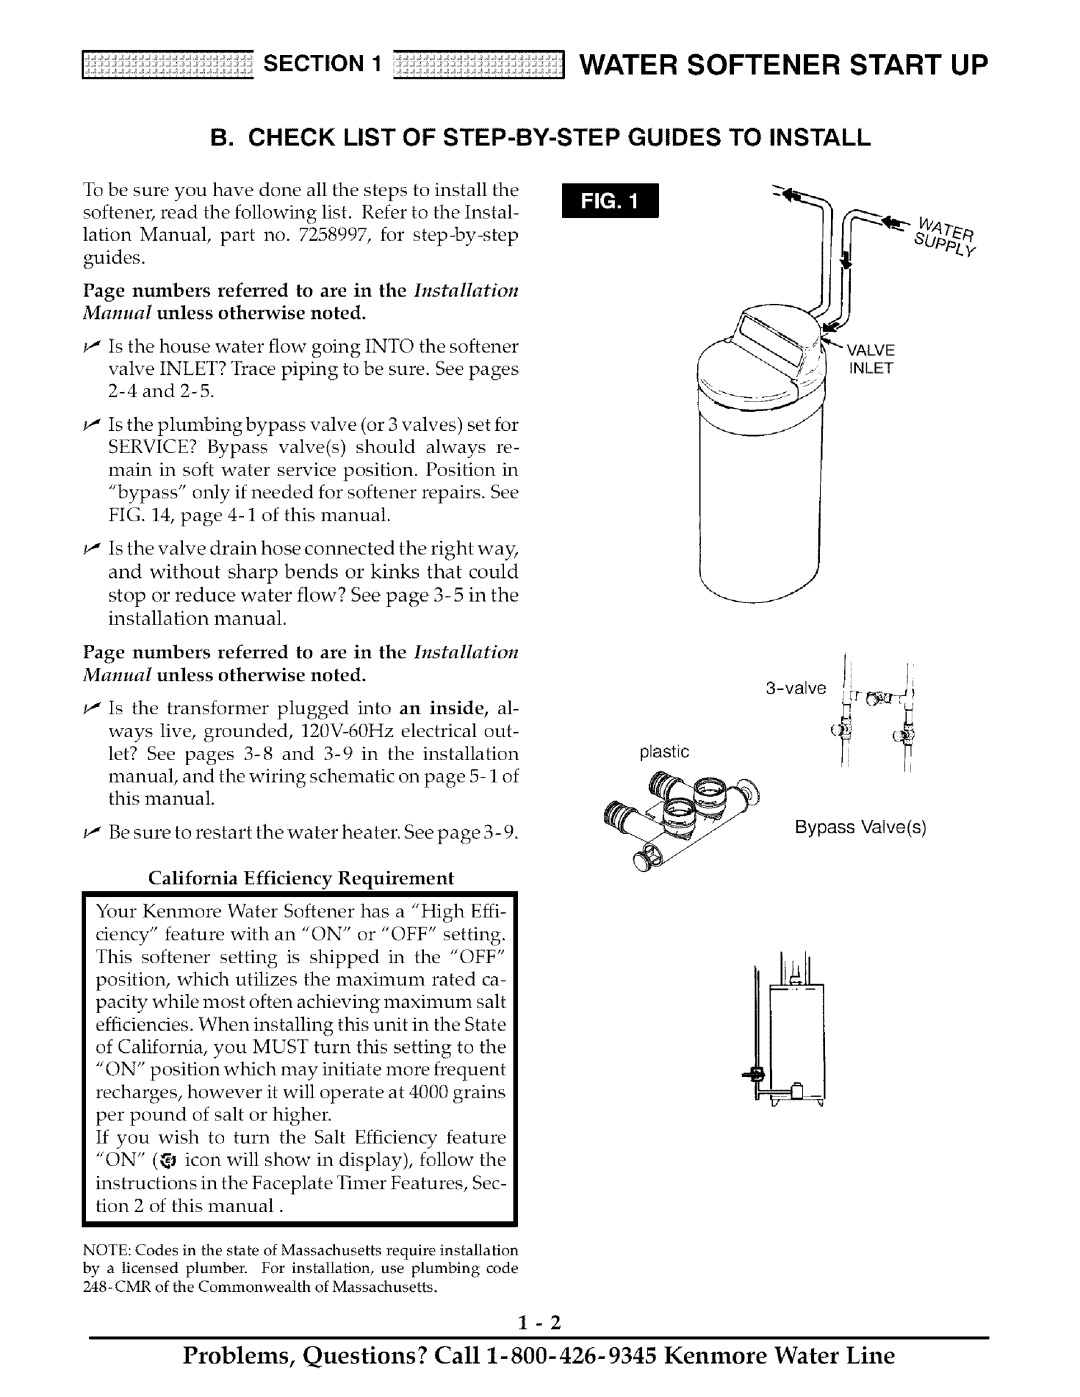 Kenmore 625.38818, 625.38817 owner manual Water Softener Start Up, Section, B. Check List Of Step-By-Step, Guides To Install 